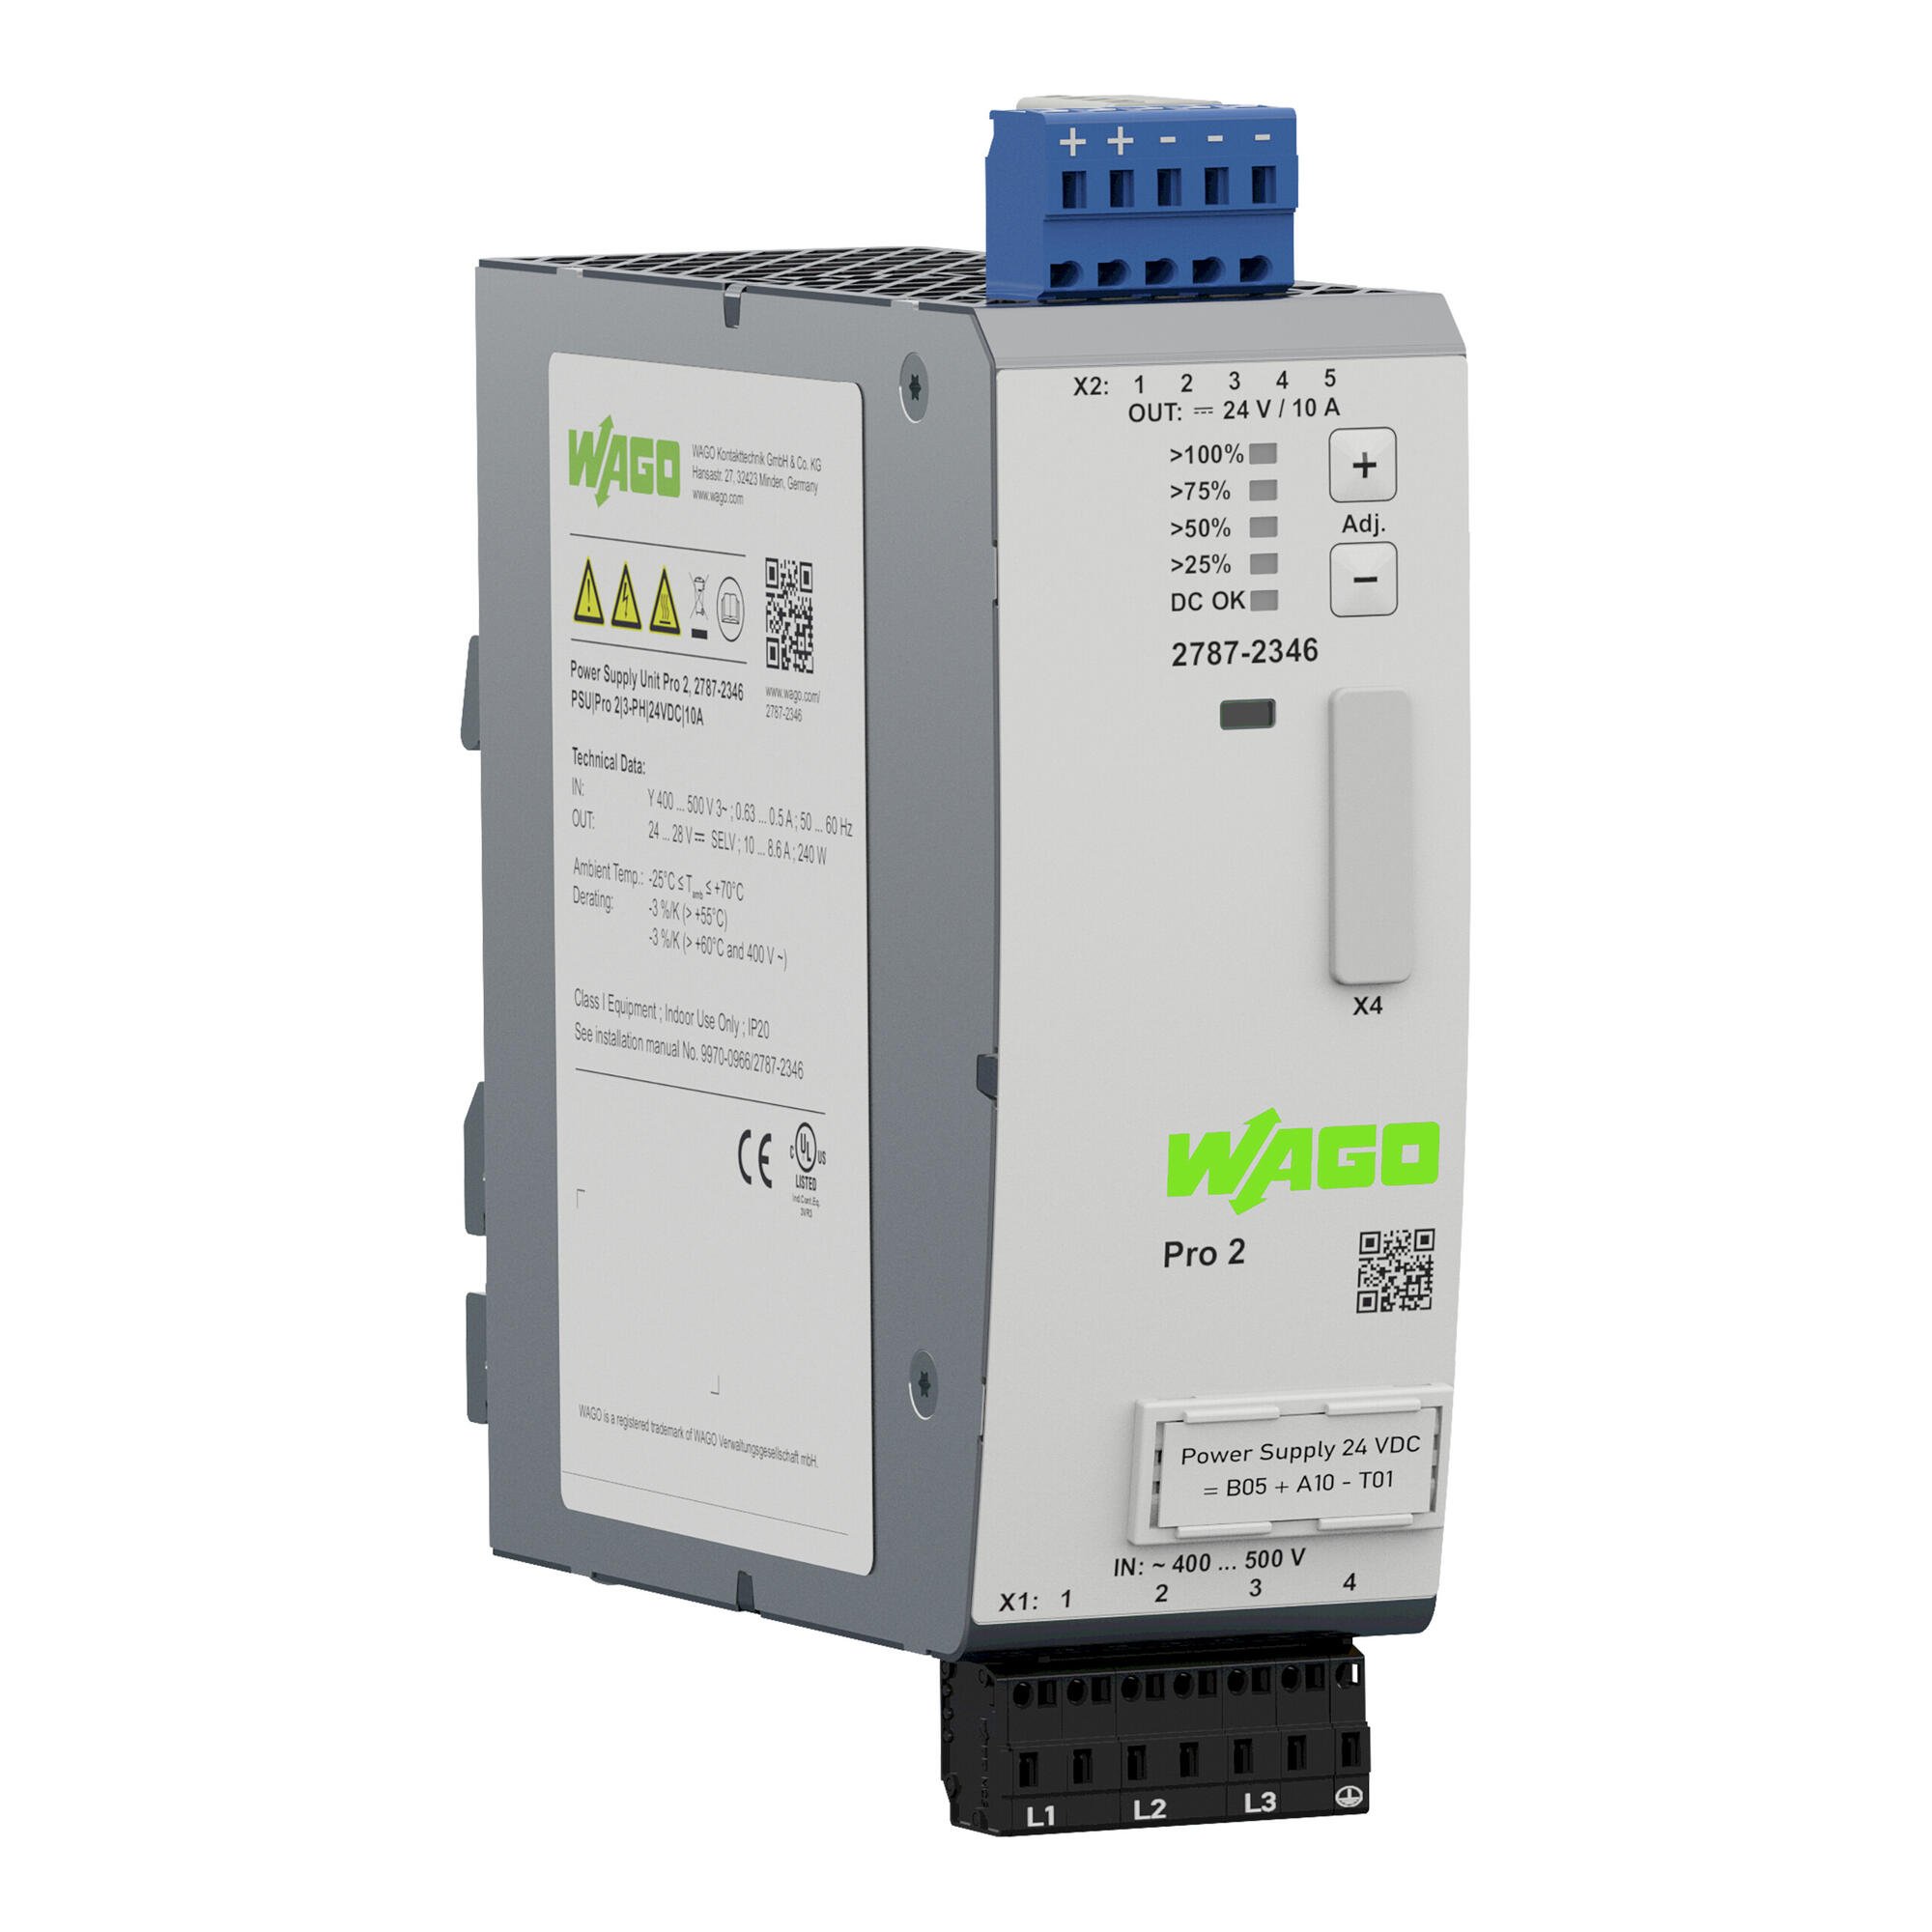 Power supply; Pro 2; 3-phase; 24 VDC output voltage; 10 A output current; TopBoost + PowerBoost; communication capability